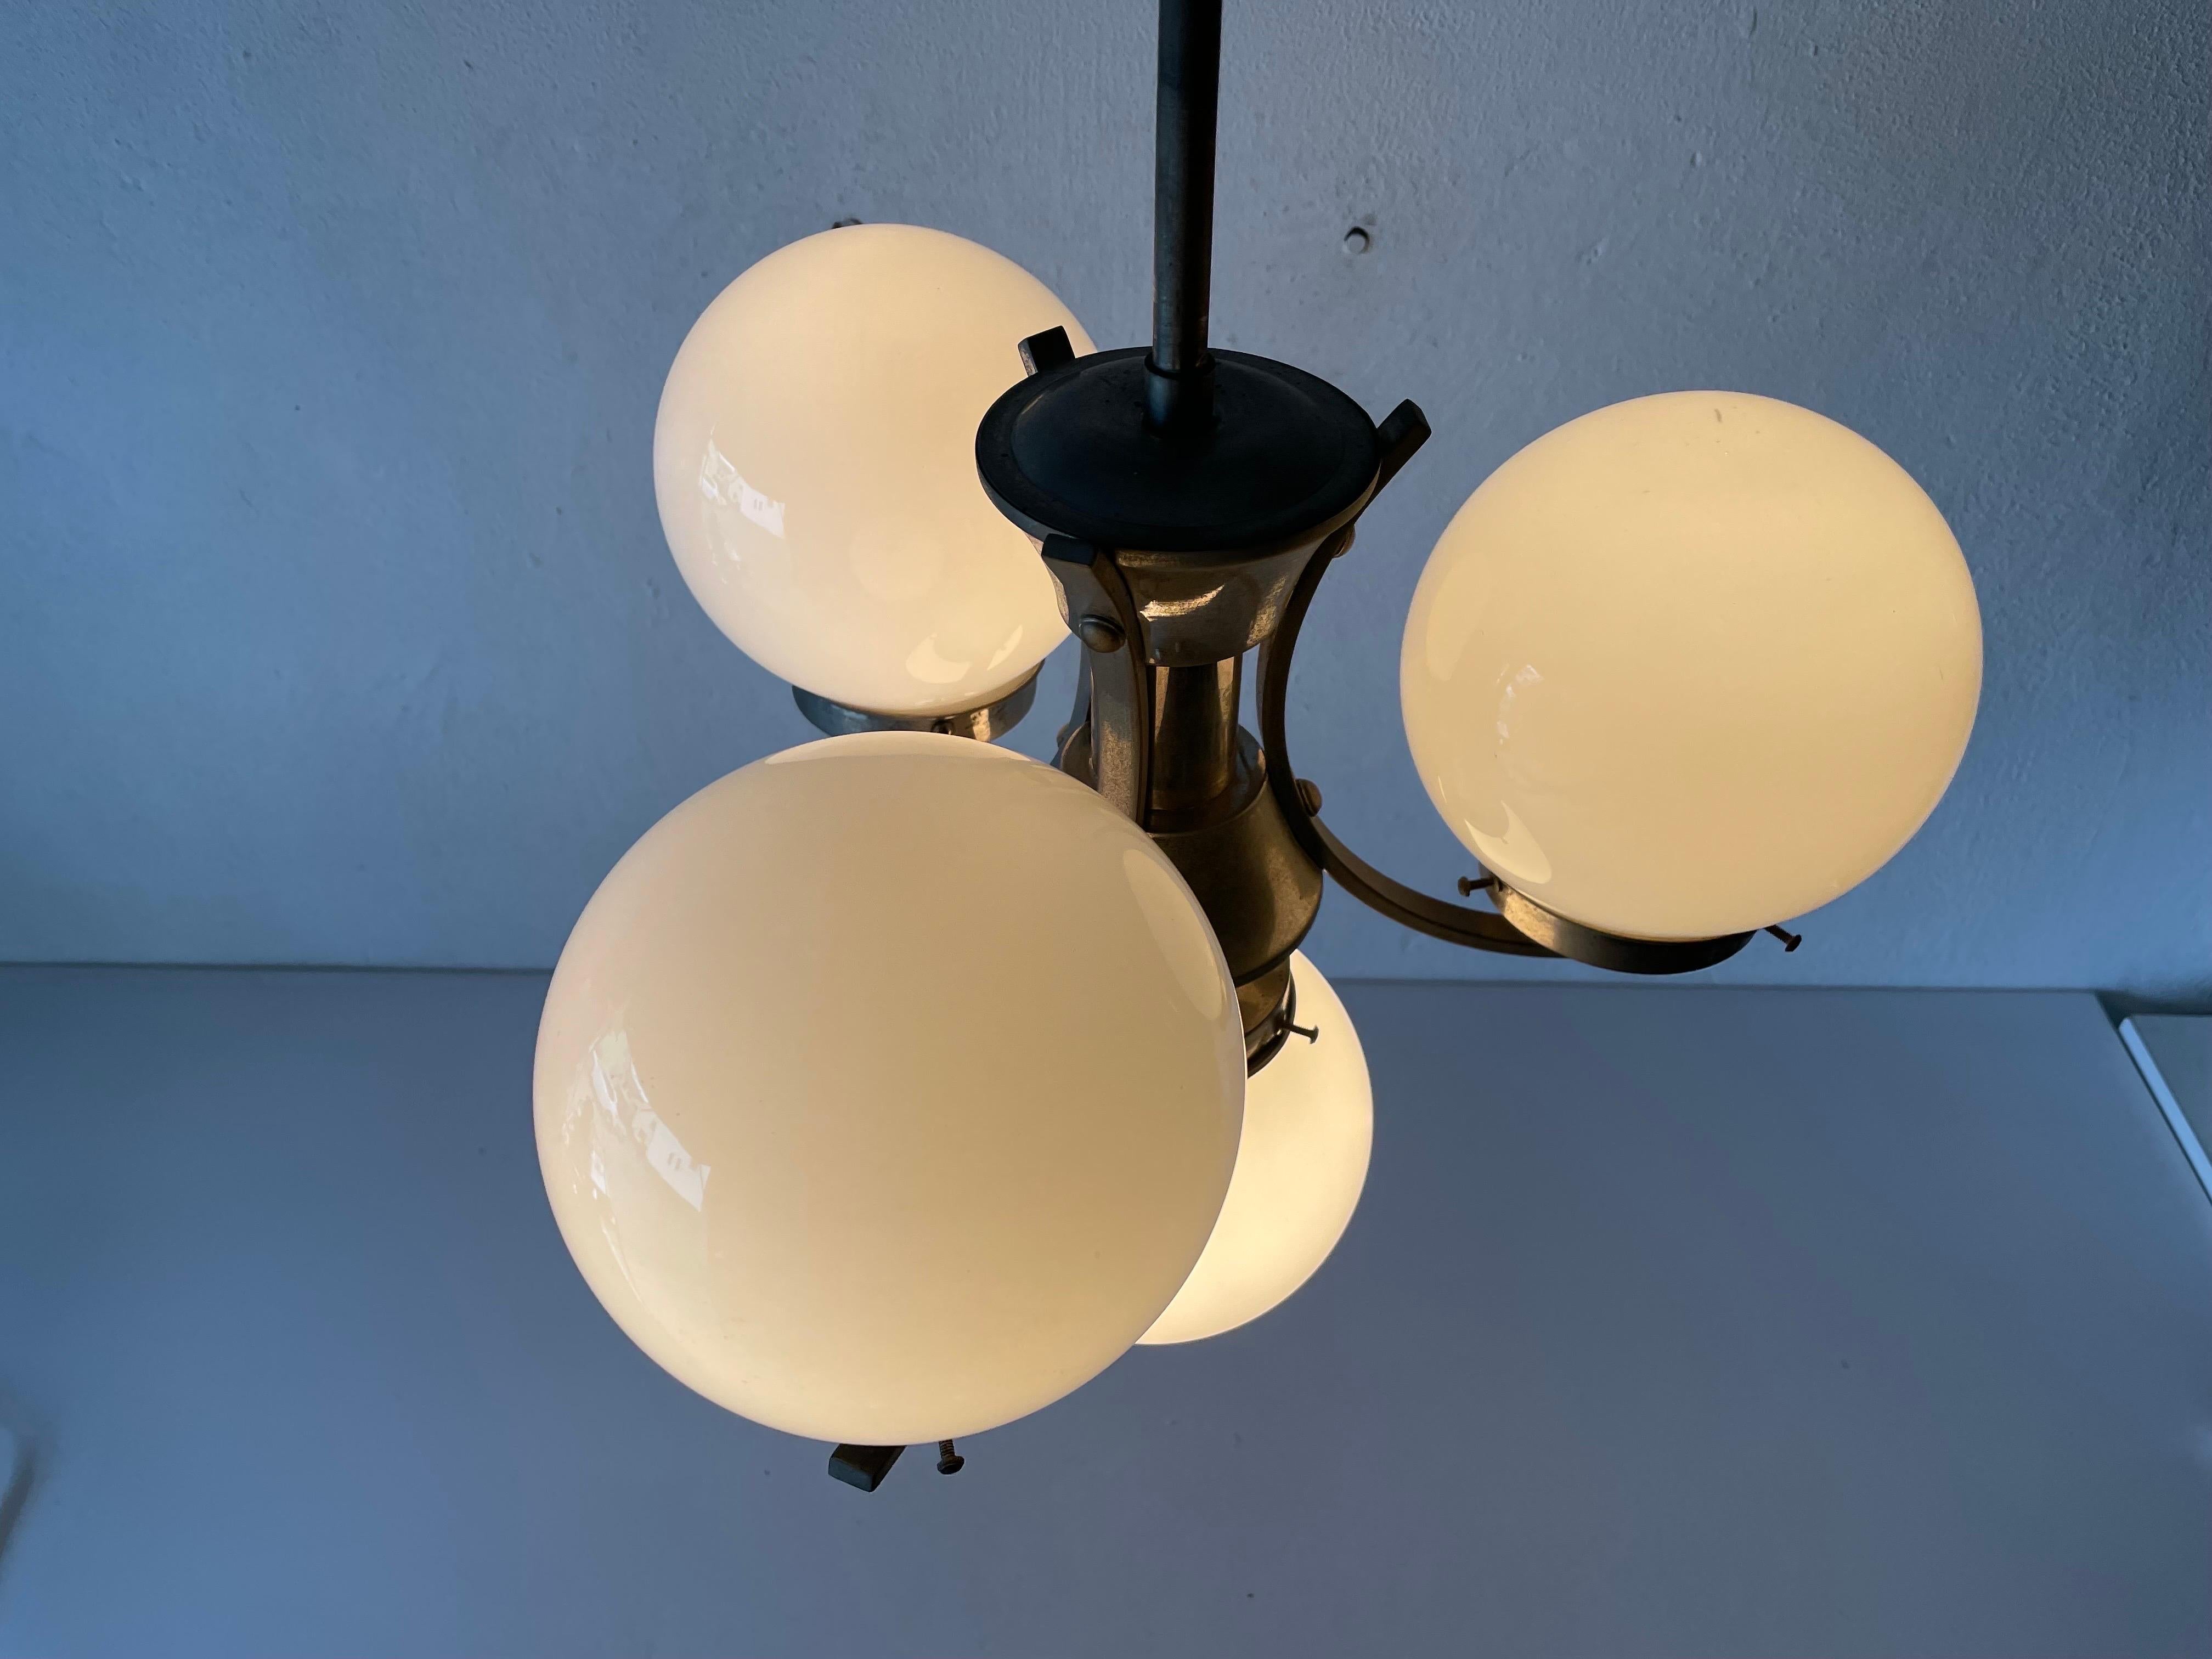 Art Deco Metallic Silver 4 Balls Ceiling Lamp, 1940s, Germany For Sale 8